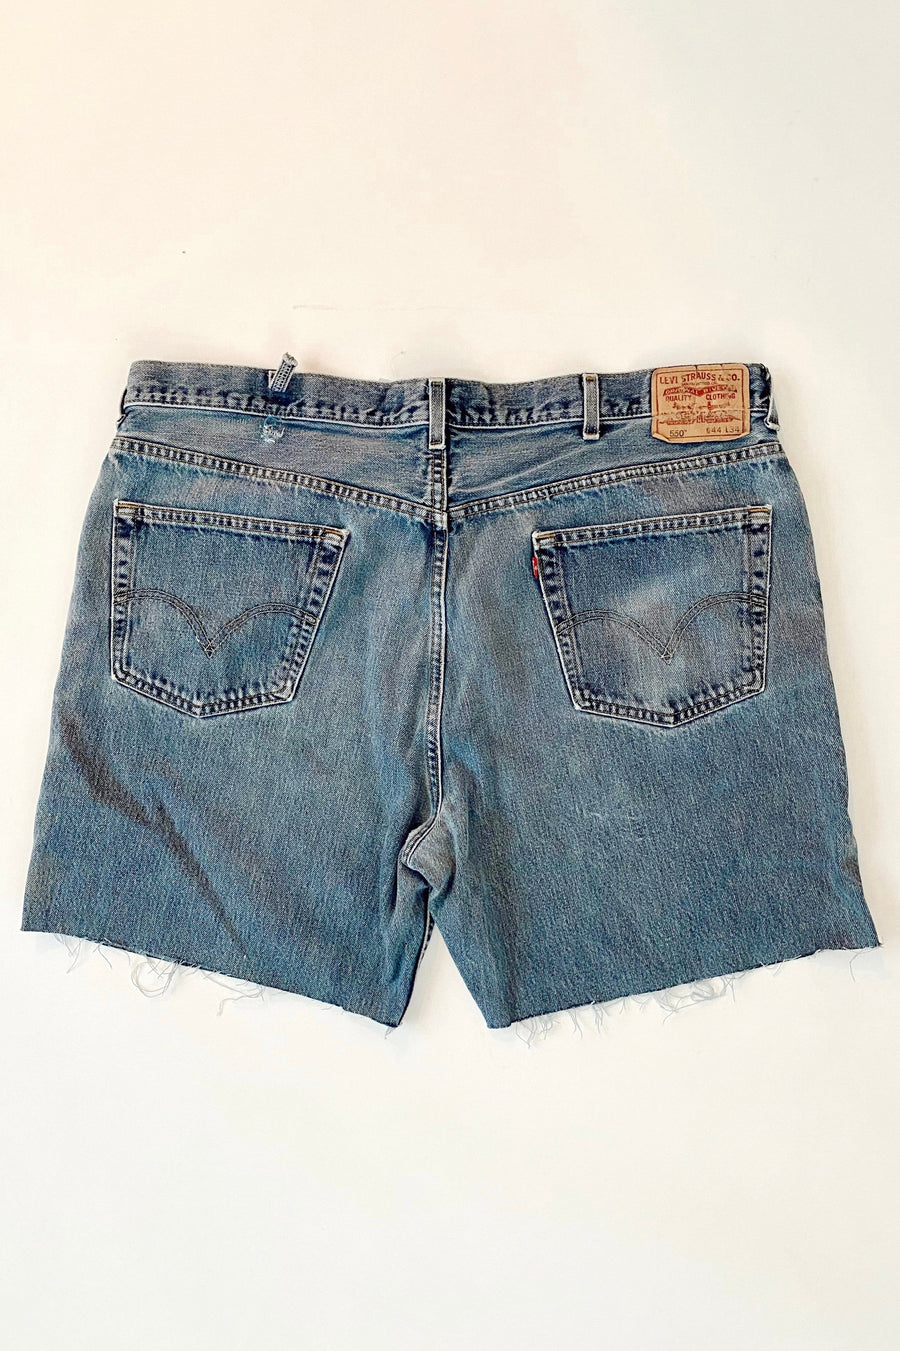 Upcycled Levi's 550 High Waist Mid Thigh Shorts / Size 38